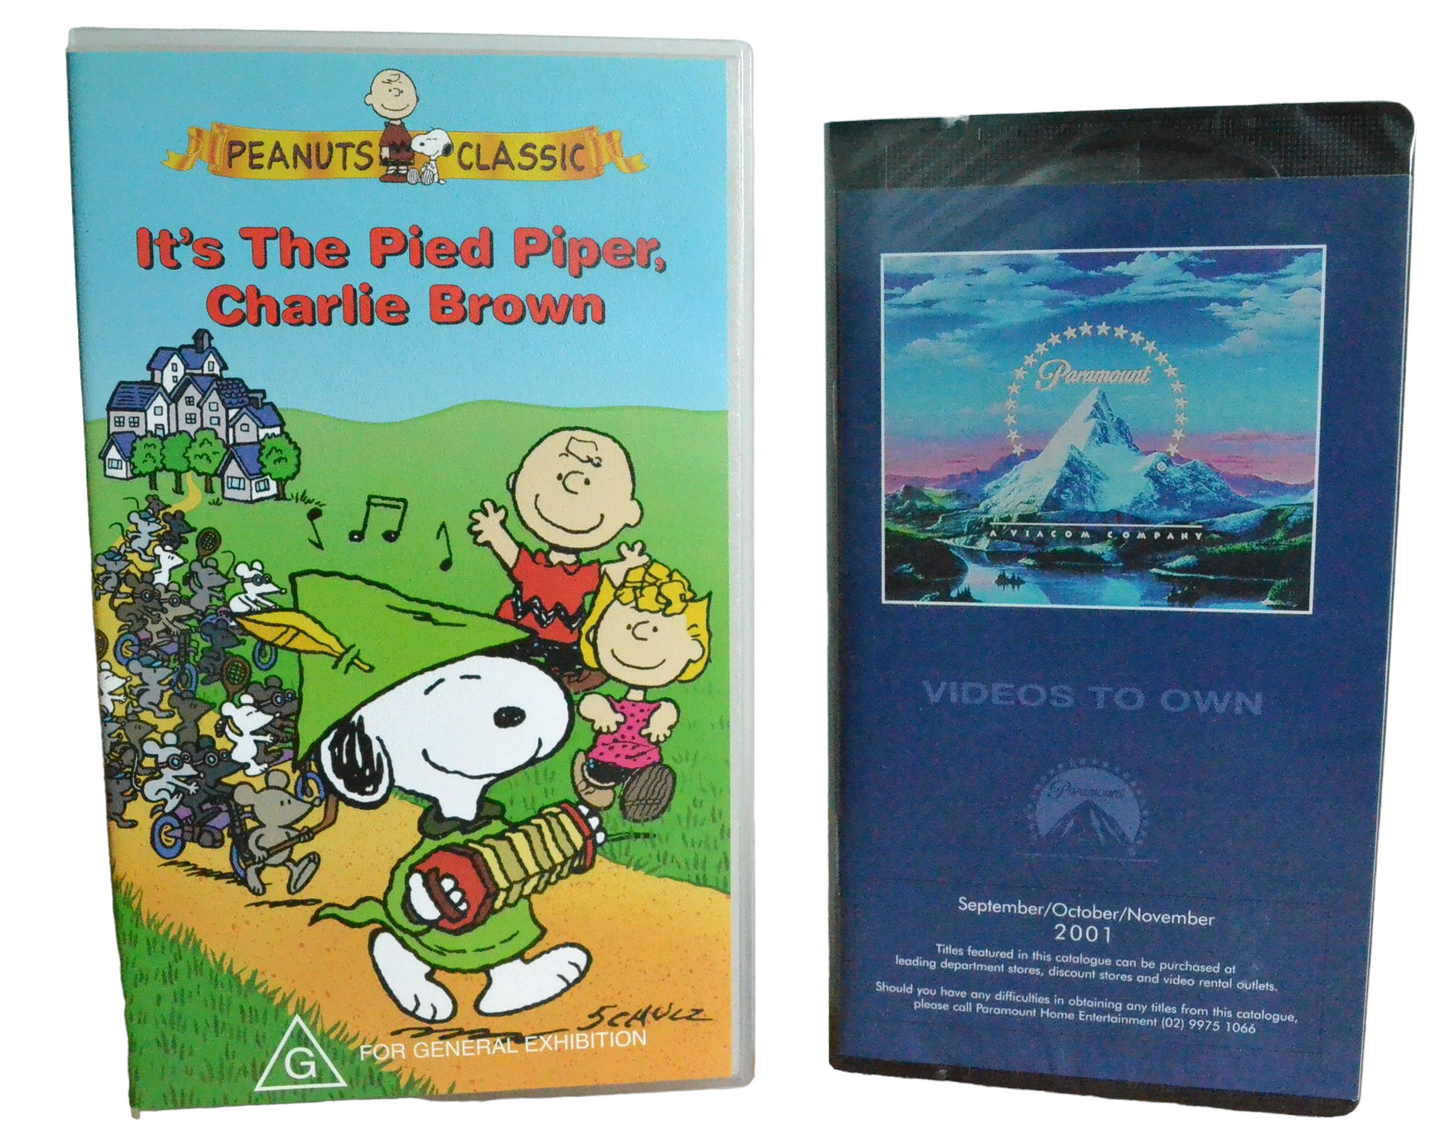 It's The Pied Piper Charlie Brown - Quinn Beswick - Paramount Home Entertainment - VSP 1964 - Brand New Sealed - Pal - VHS-